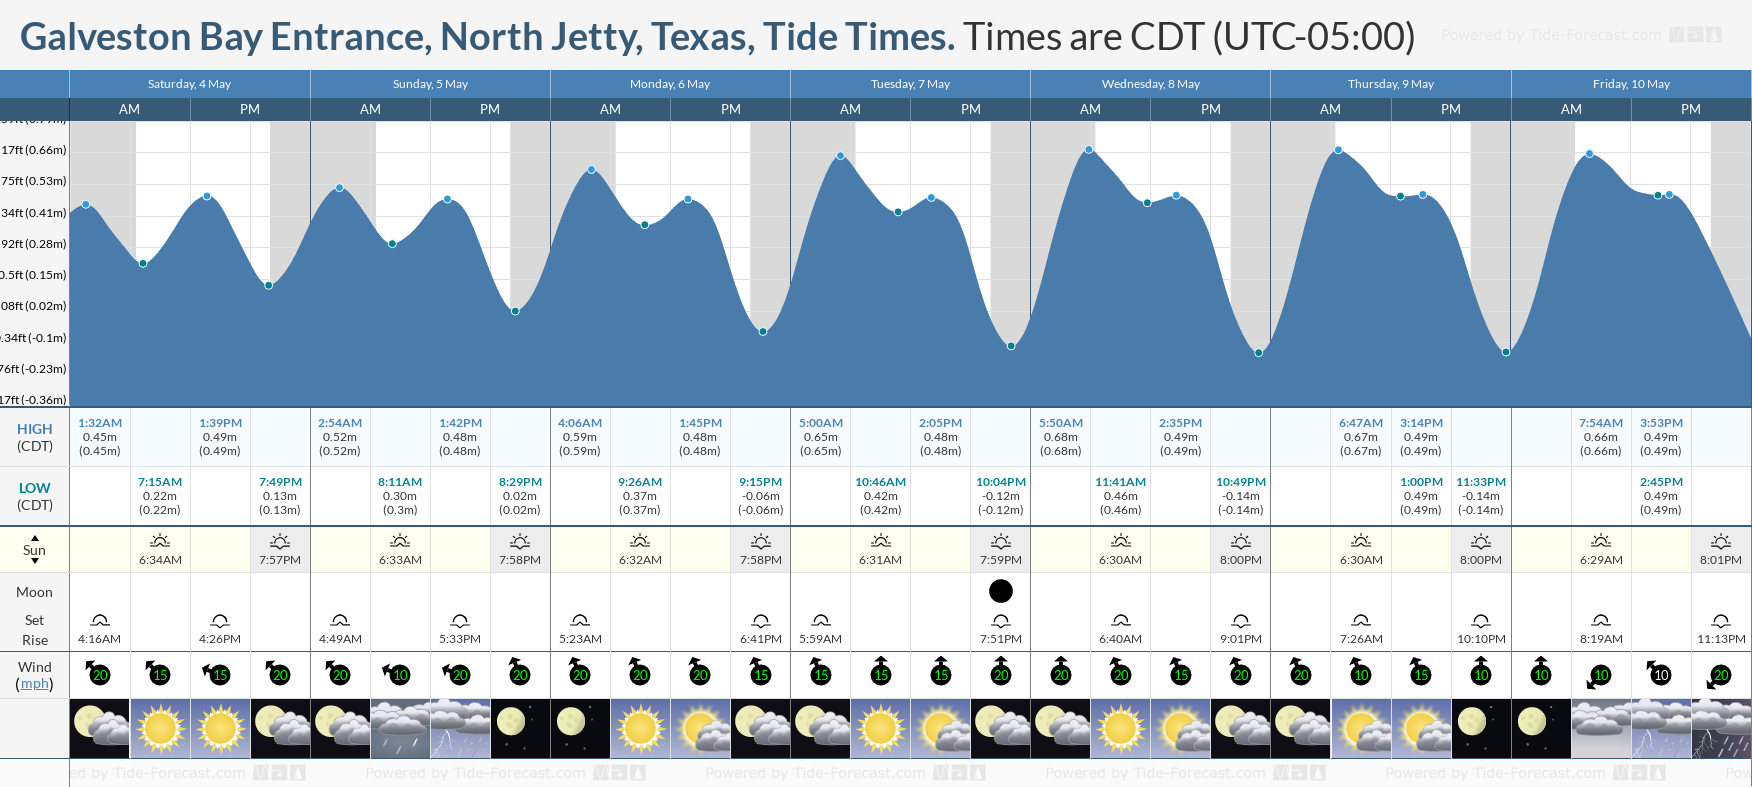 Galveston Bay Entrance, North Jetty, Texas Tide Chart including high and low tide times for the next 7 days